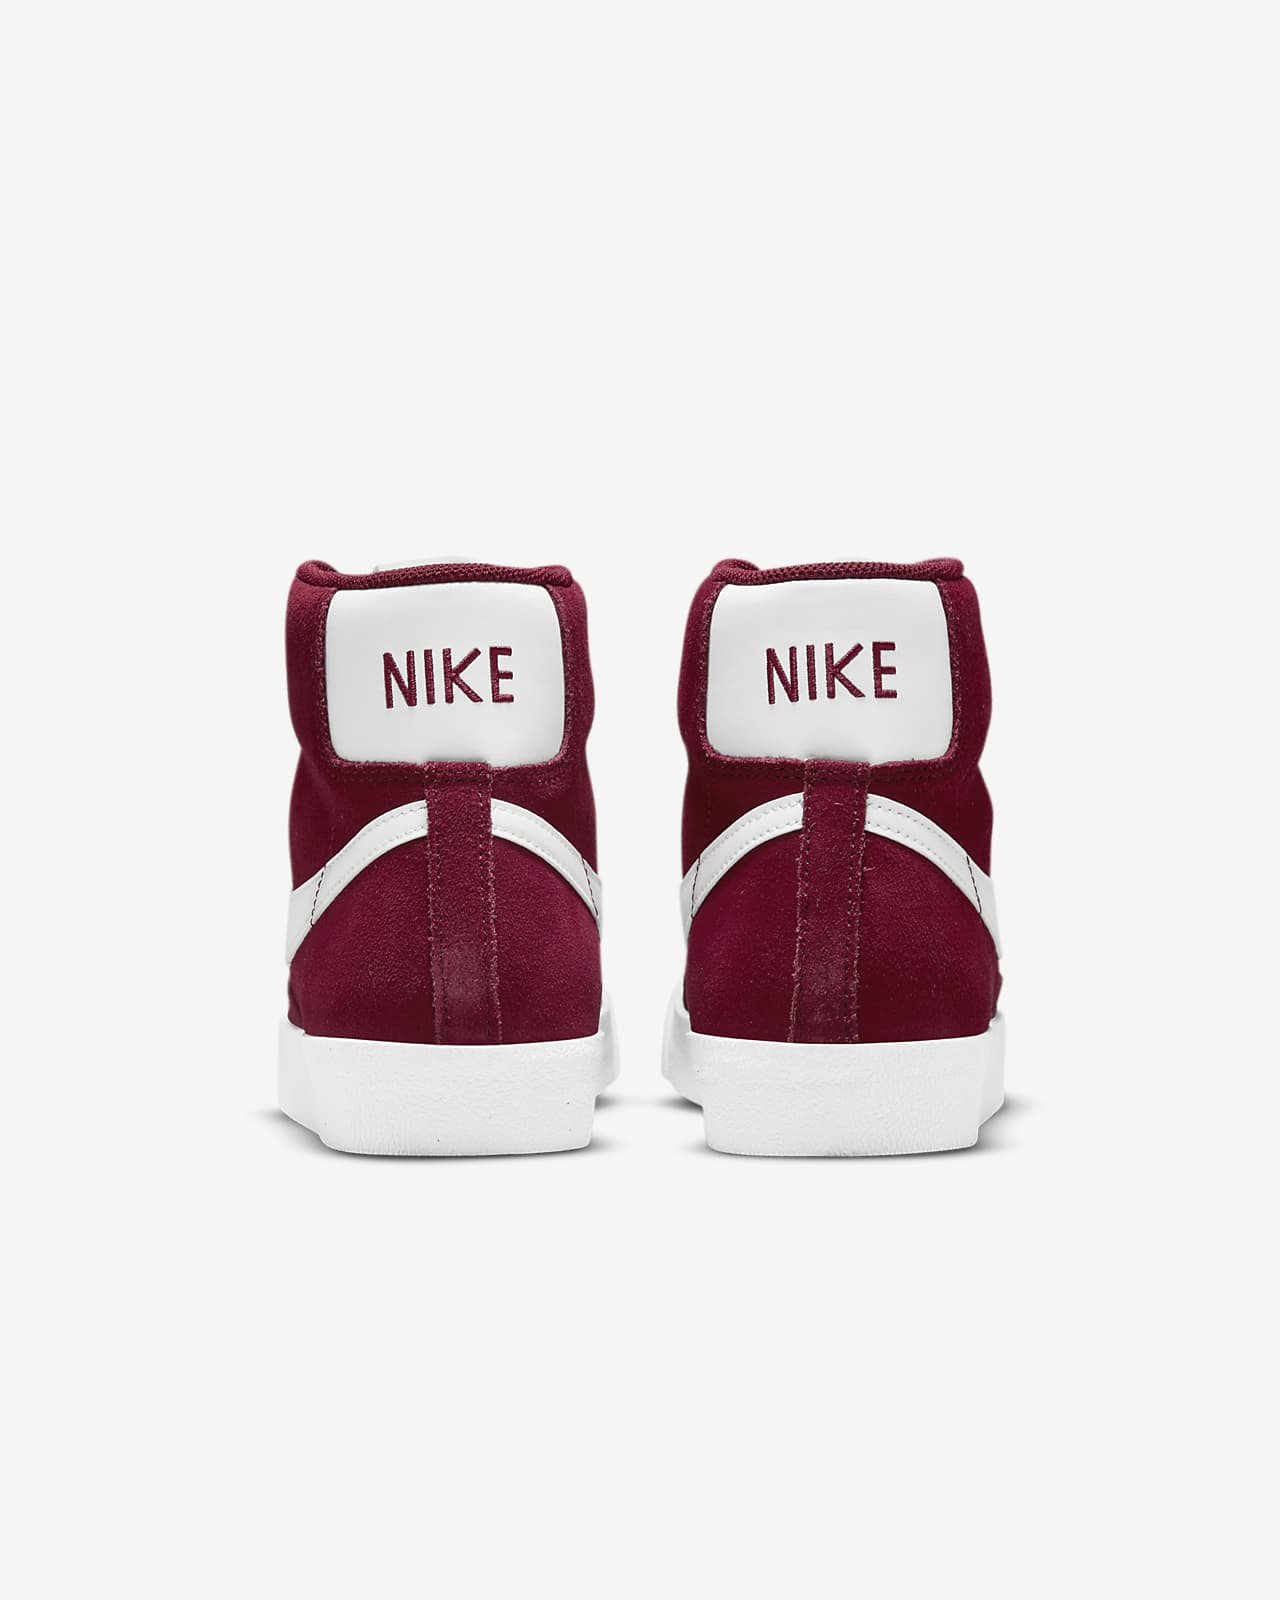 Nike Blazer Mid 77 Suede Shoes Review